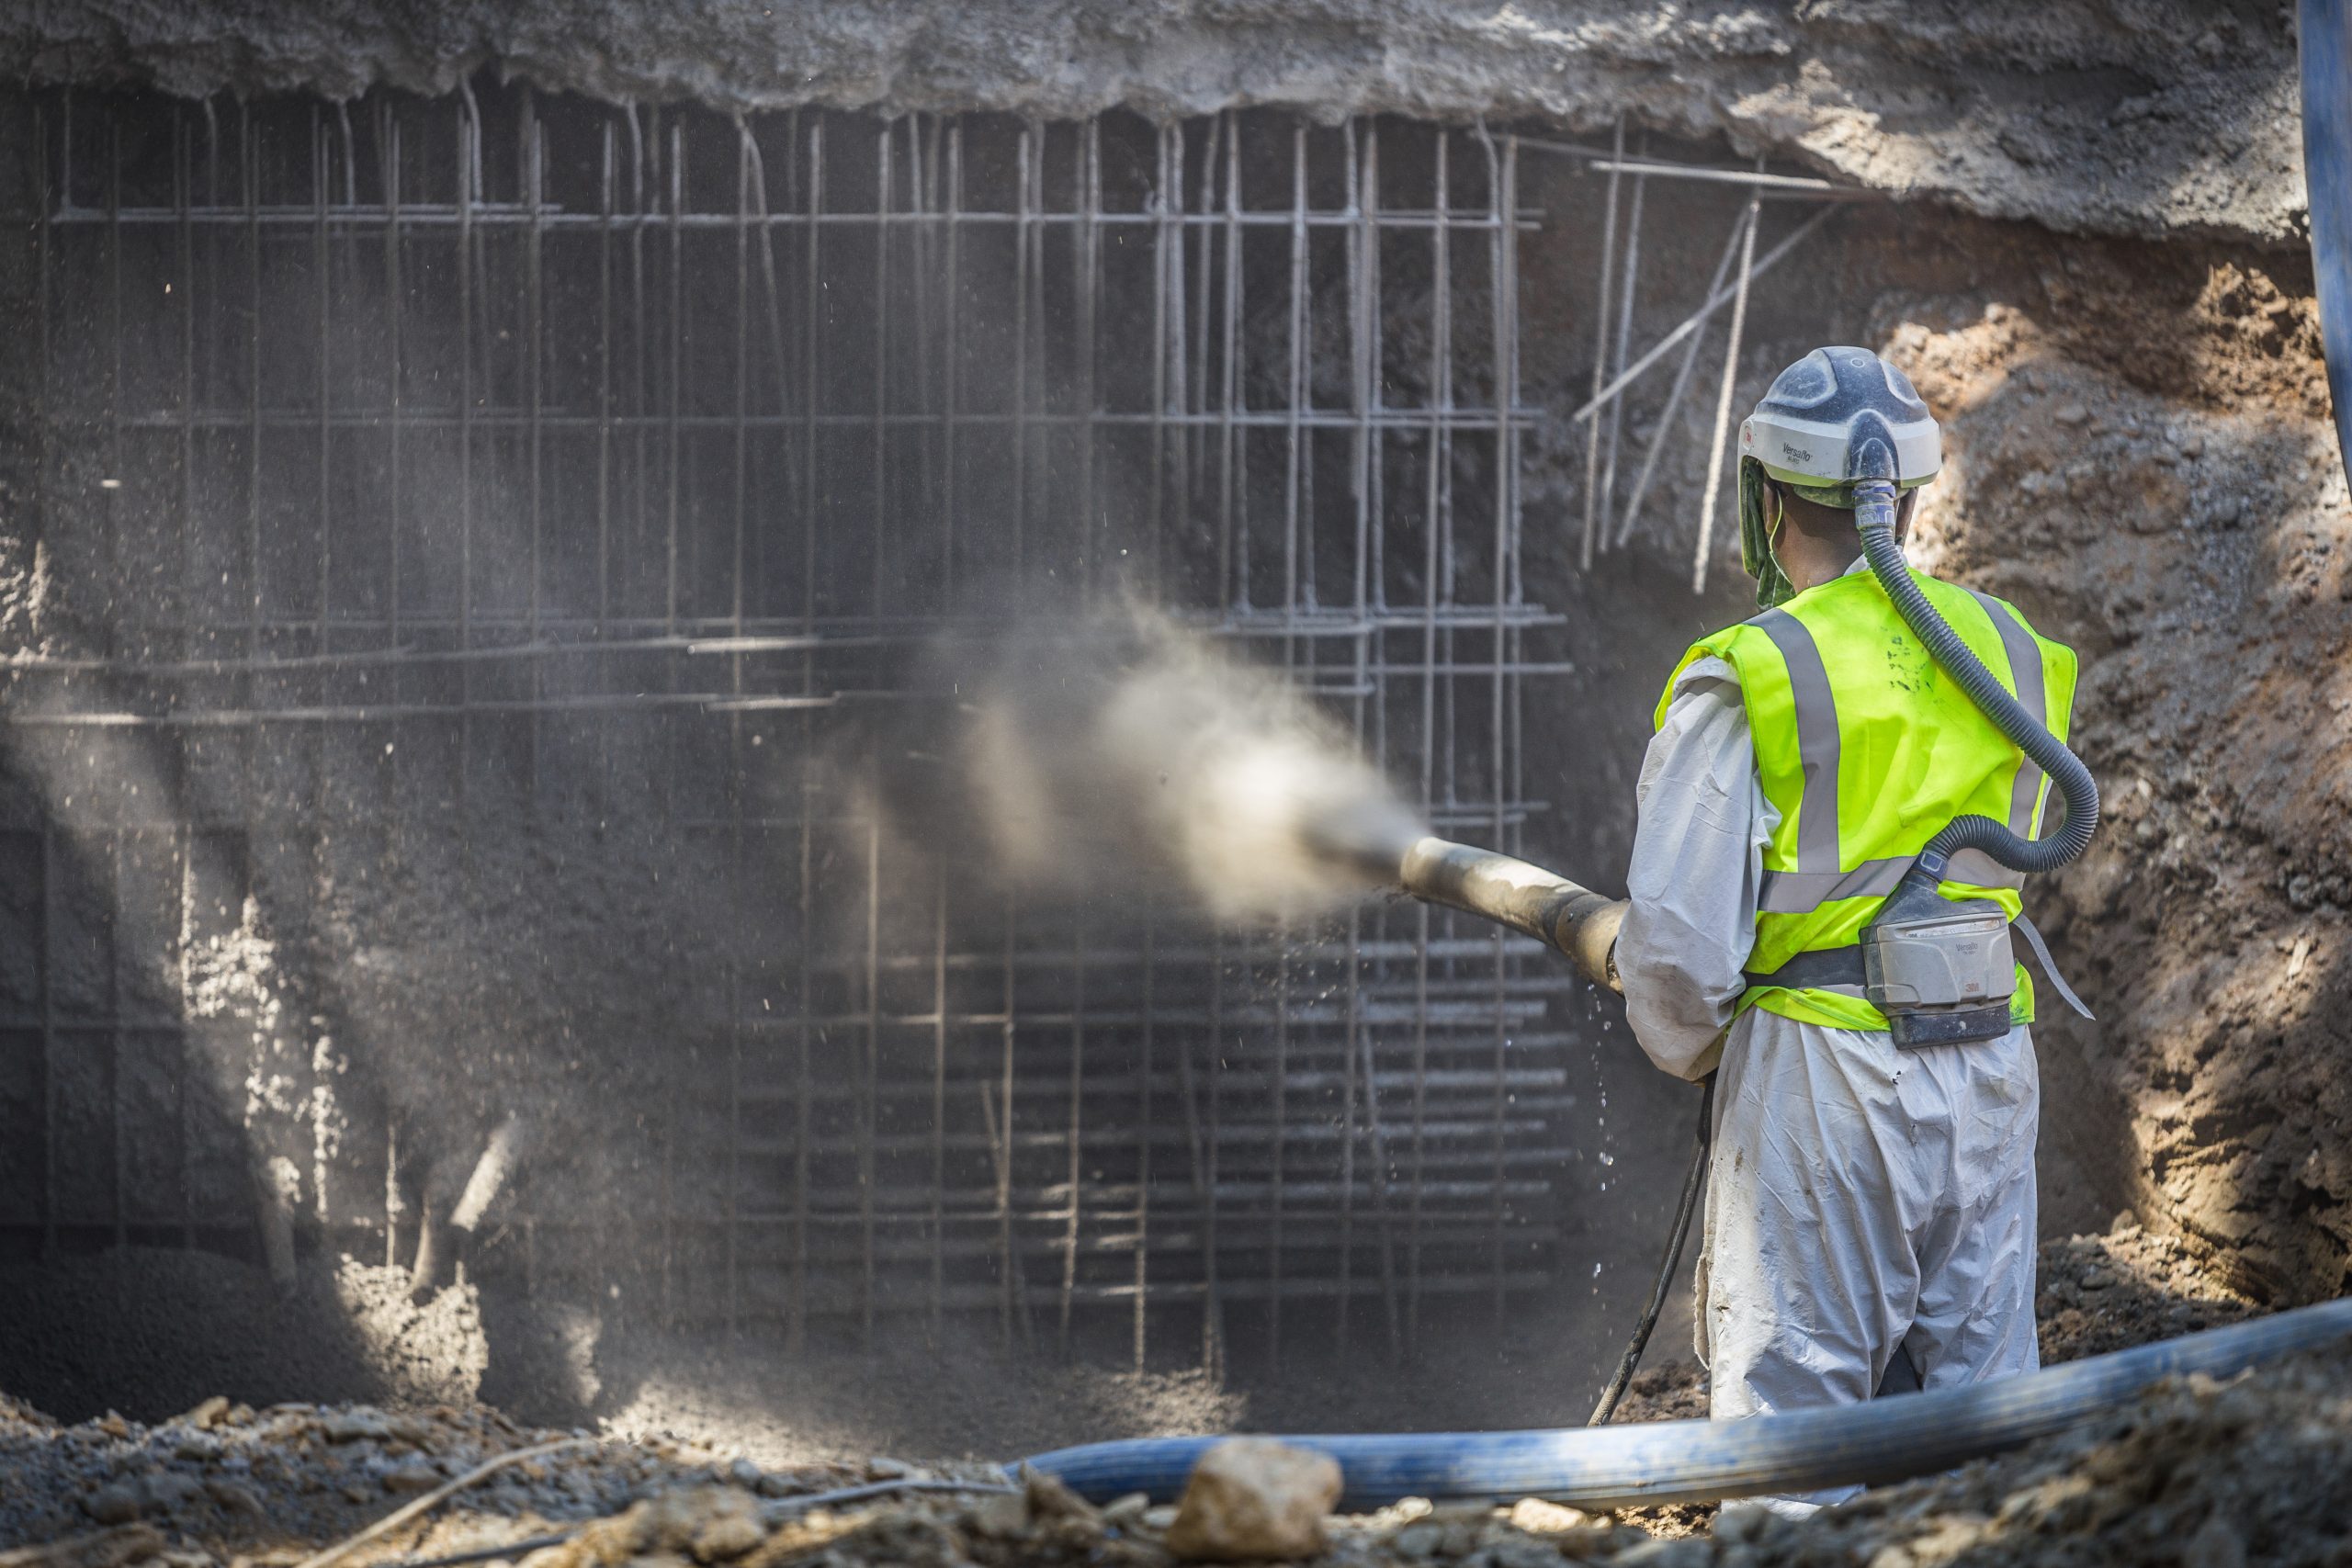 An image of a man spraying concrete for building construction